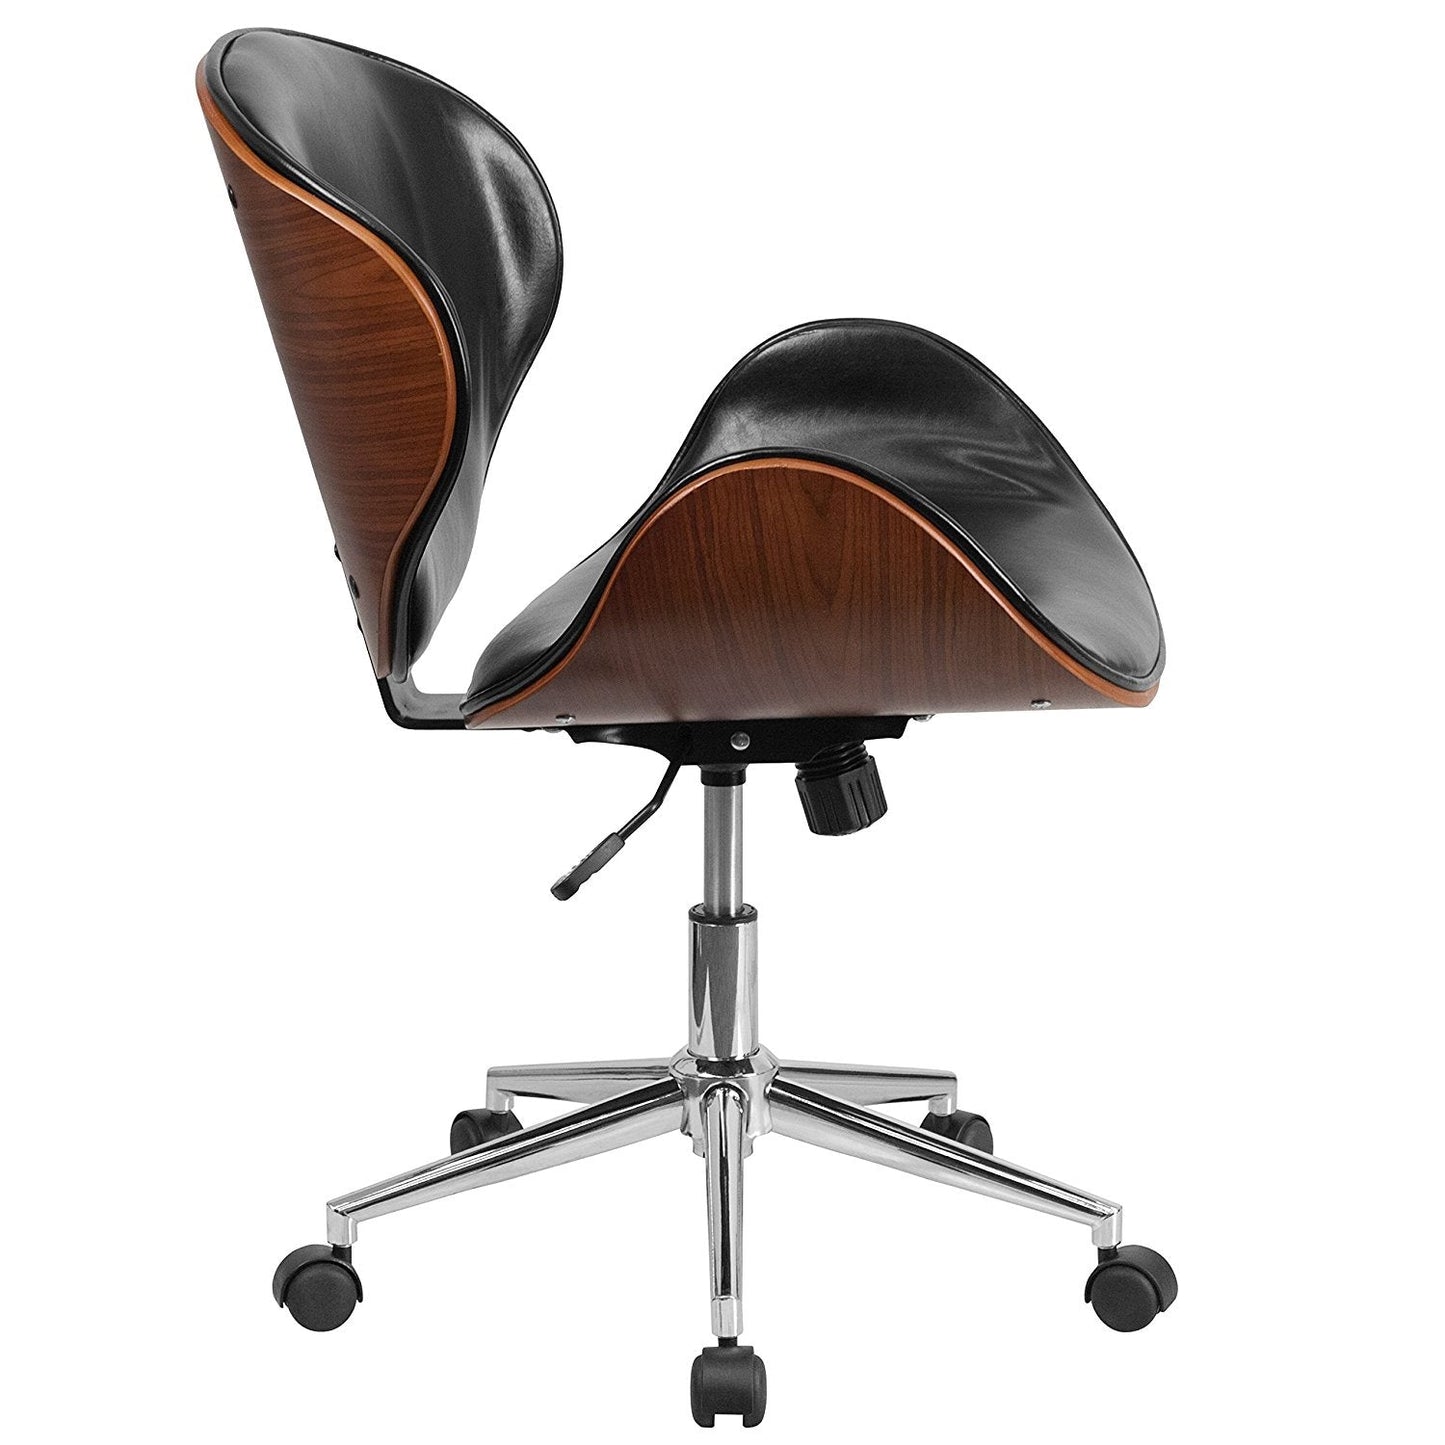 Office > Office Chairs - Mid-Back Walnut / Black Faux Leather Office Chair With Curved Bentwood Seat